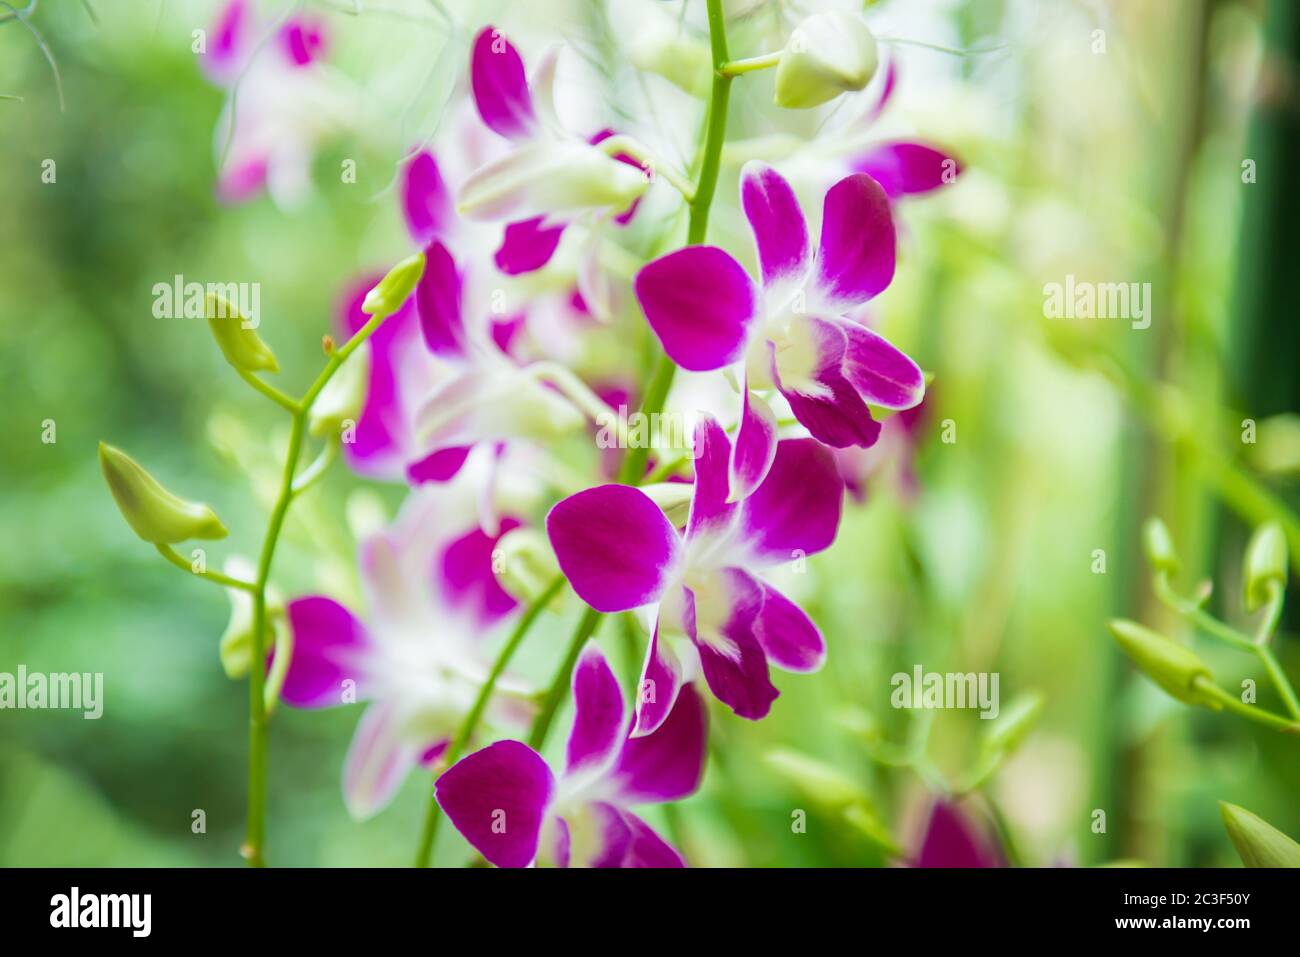 Closeup view of bloom of white, purple and pink tropical orchid flowers Stock Photo